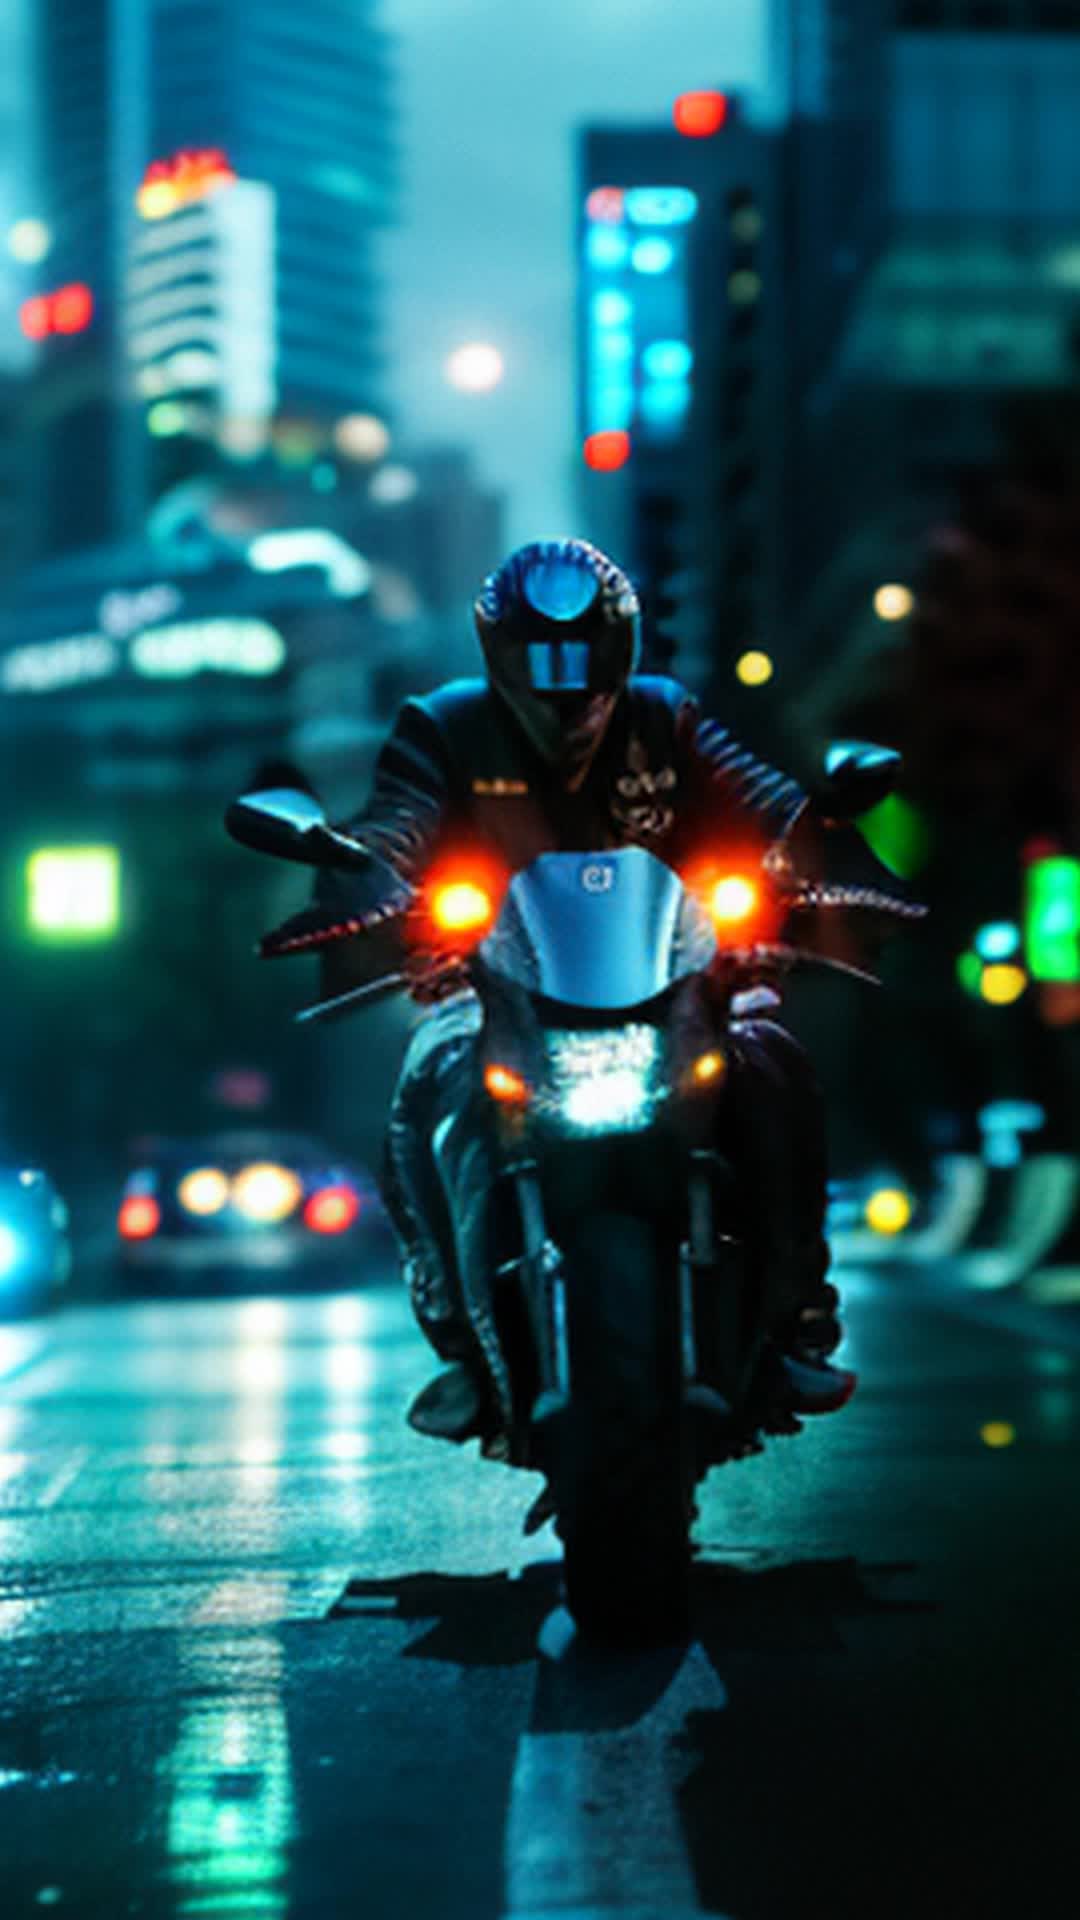 Highspeed motorcycle race, urban cityscape, sleek futuristic bikes, neon lights reflecting off wet pavement, intense competition, zooming past skyscrapers, tight turns, adrenalinefilled chase, engines roaring, dynamic motion blur, glowing billboards overhead, gritty and intense atmosphere, cinematic feel, thrilling action seqence, rendered in 4K ultraHD, highly detailed, soft shadows, sweeping wideangle shots, GoPro perspective, dramatic lighting, by art germ